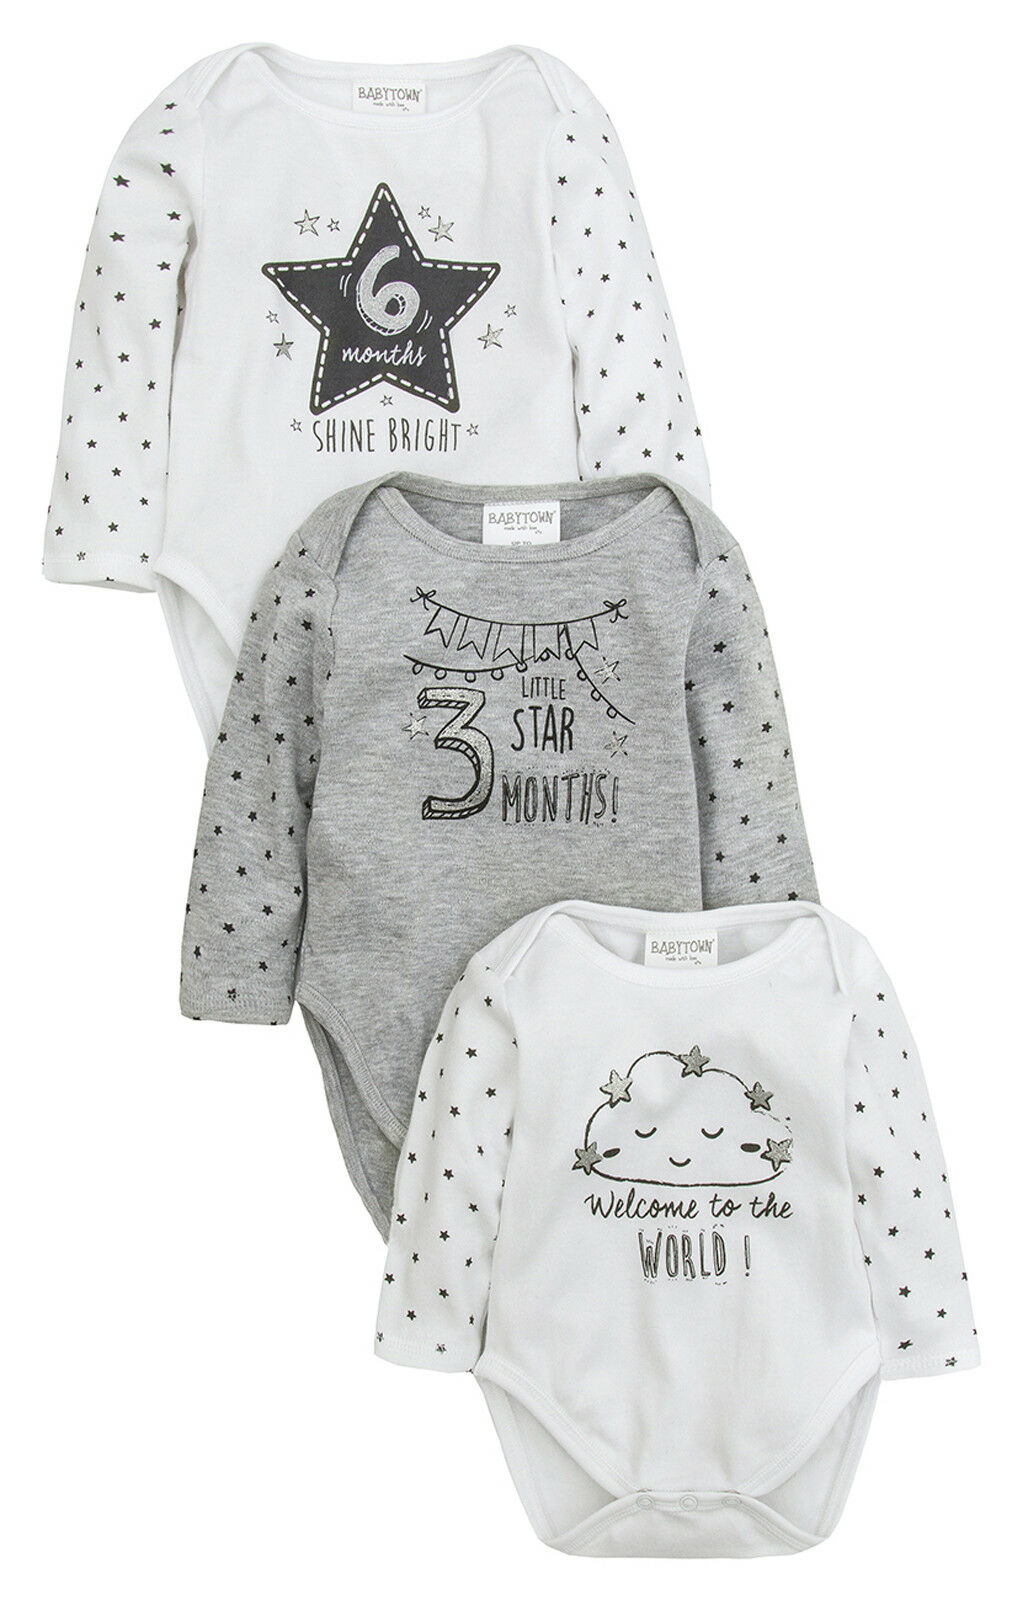 3 cotton baby milestone baby bodysuits in grey , white and black with print that reads " Welcome to the World", "little star 3 months", "6 months shine bright".